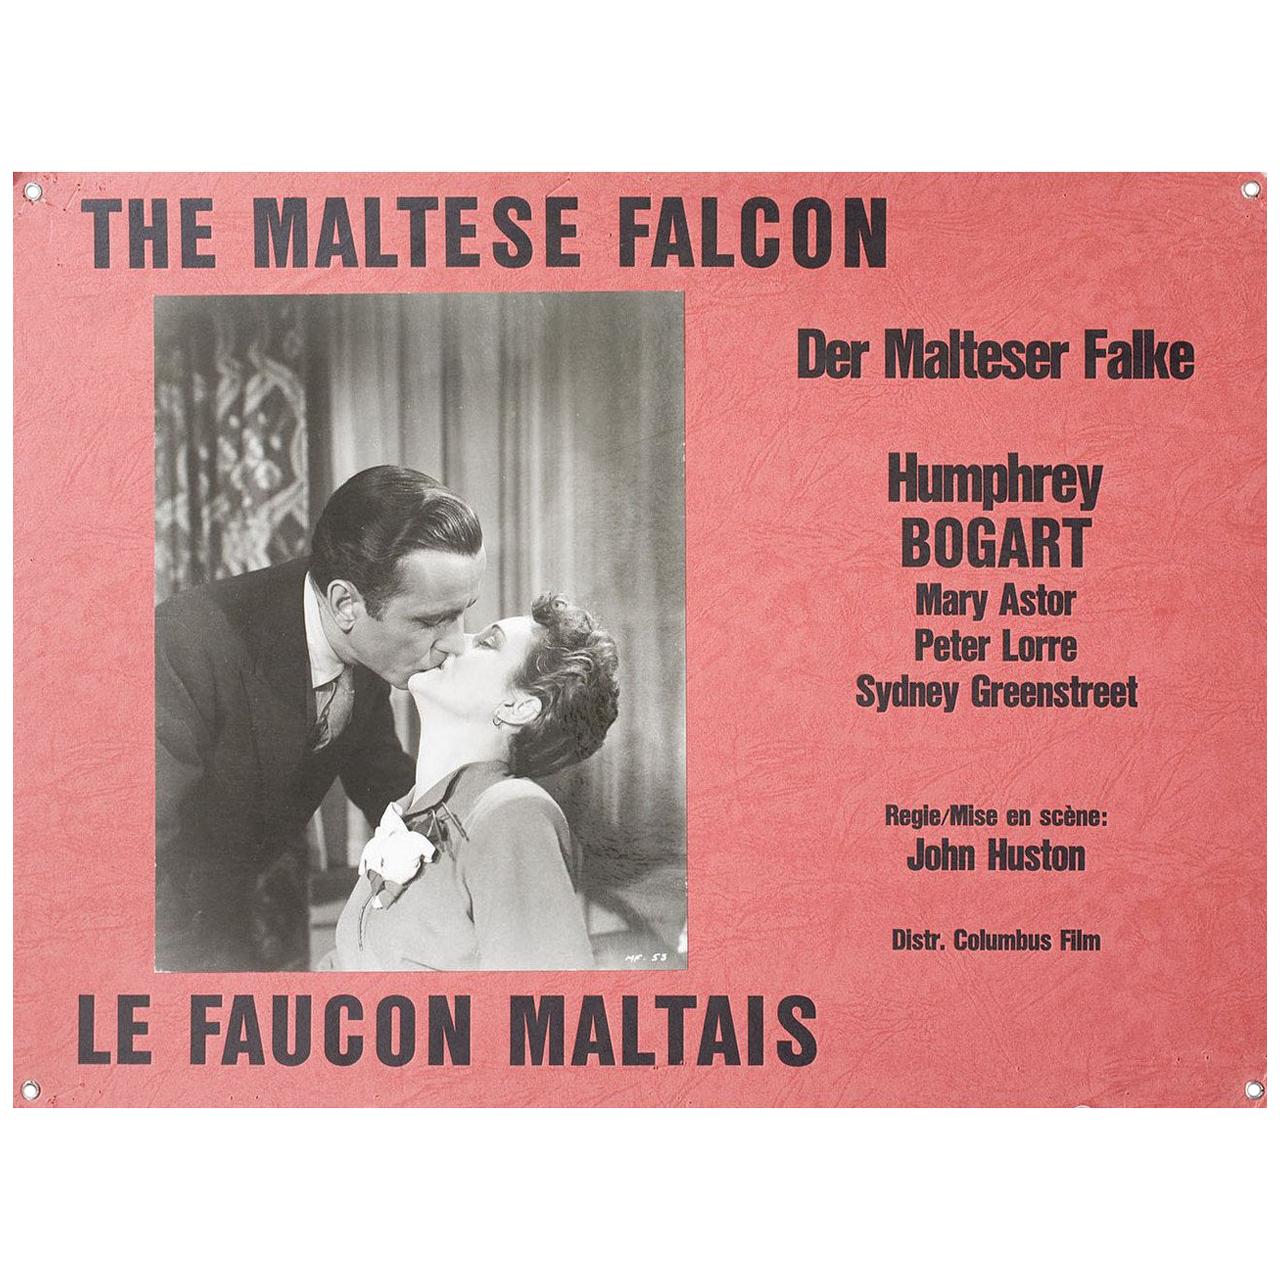 Le Faucon Maltais Wall art. poster French Reproduction film advertising